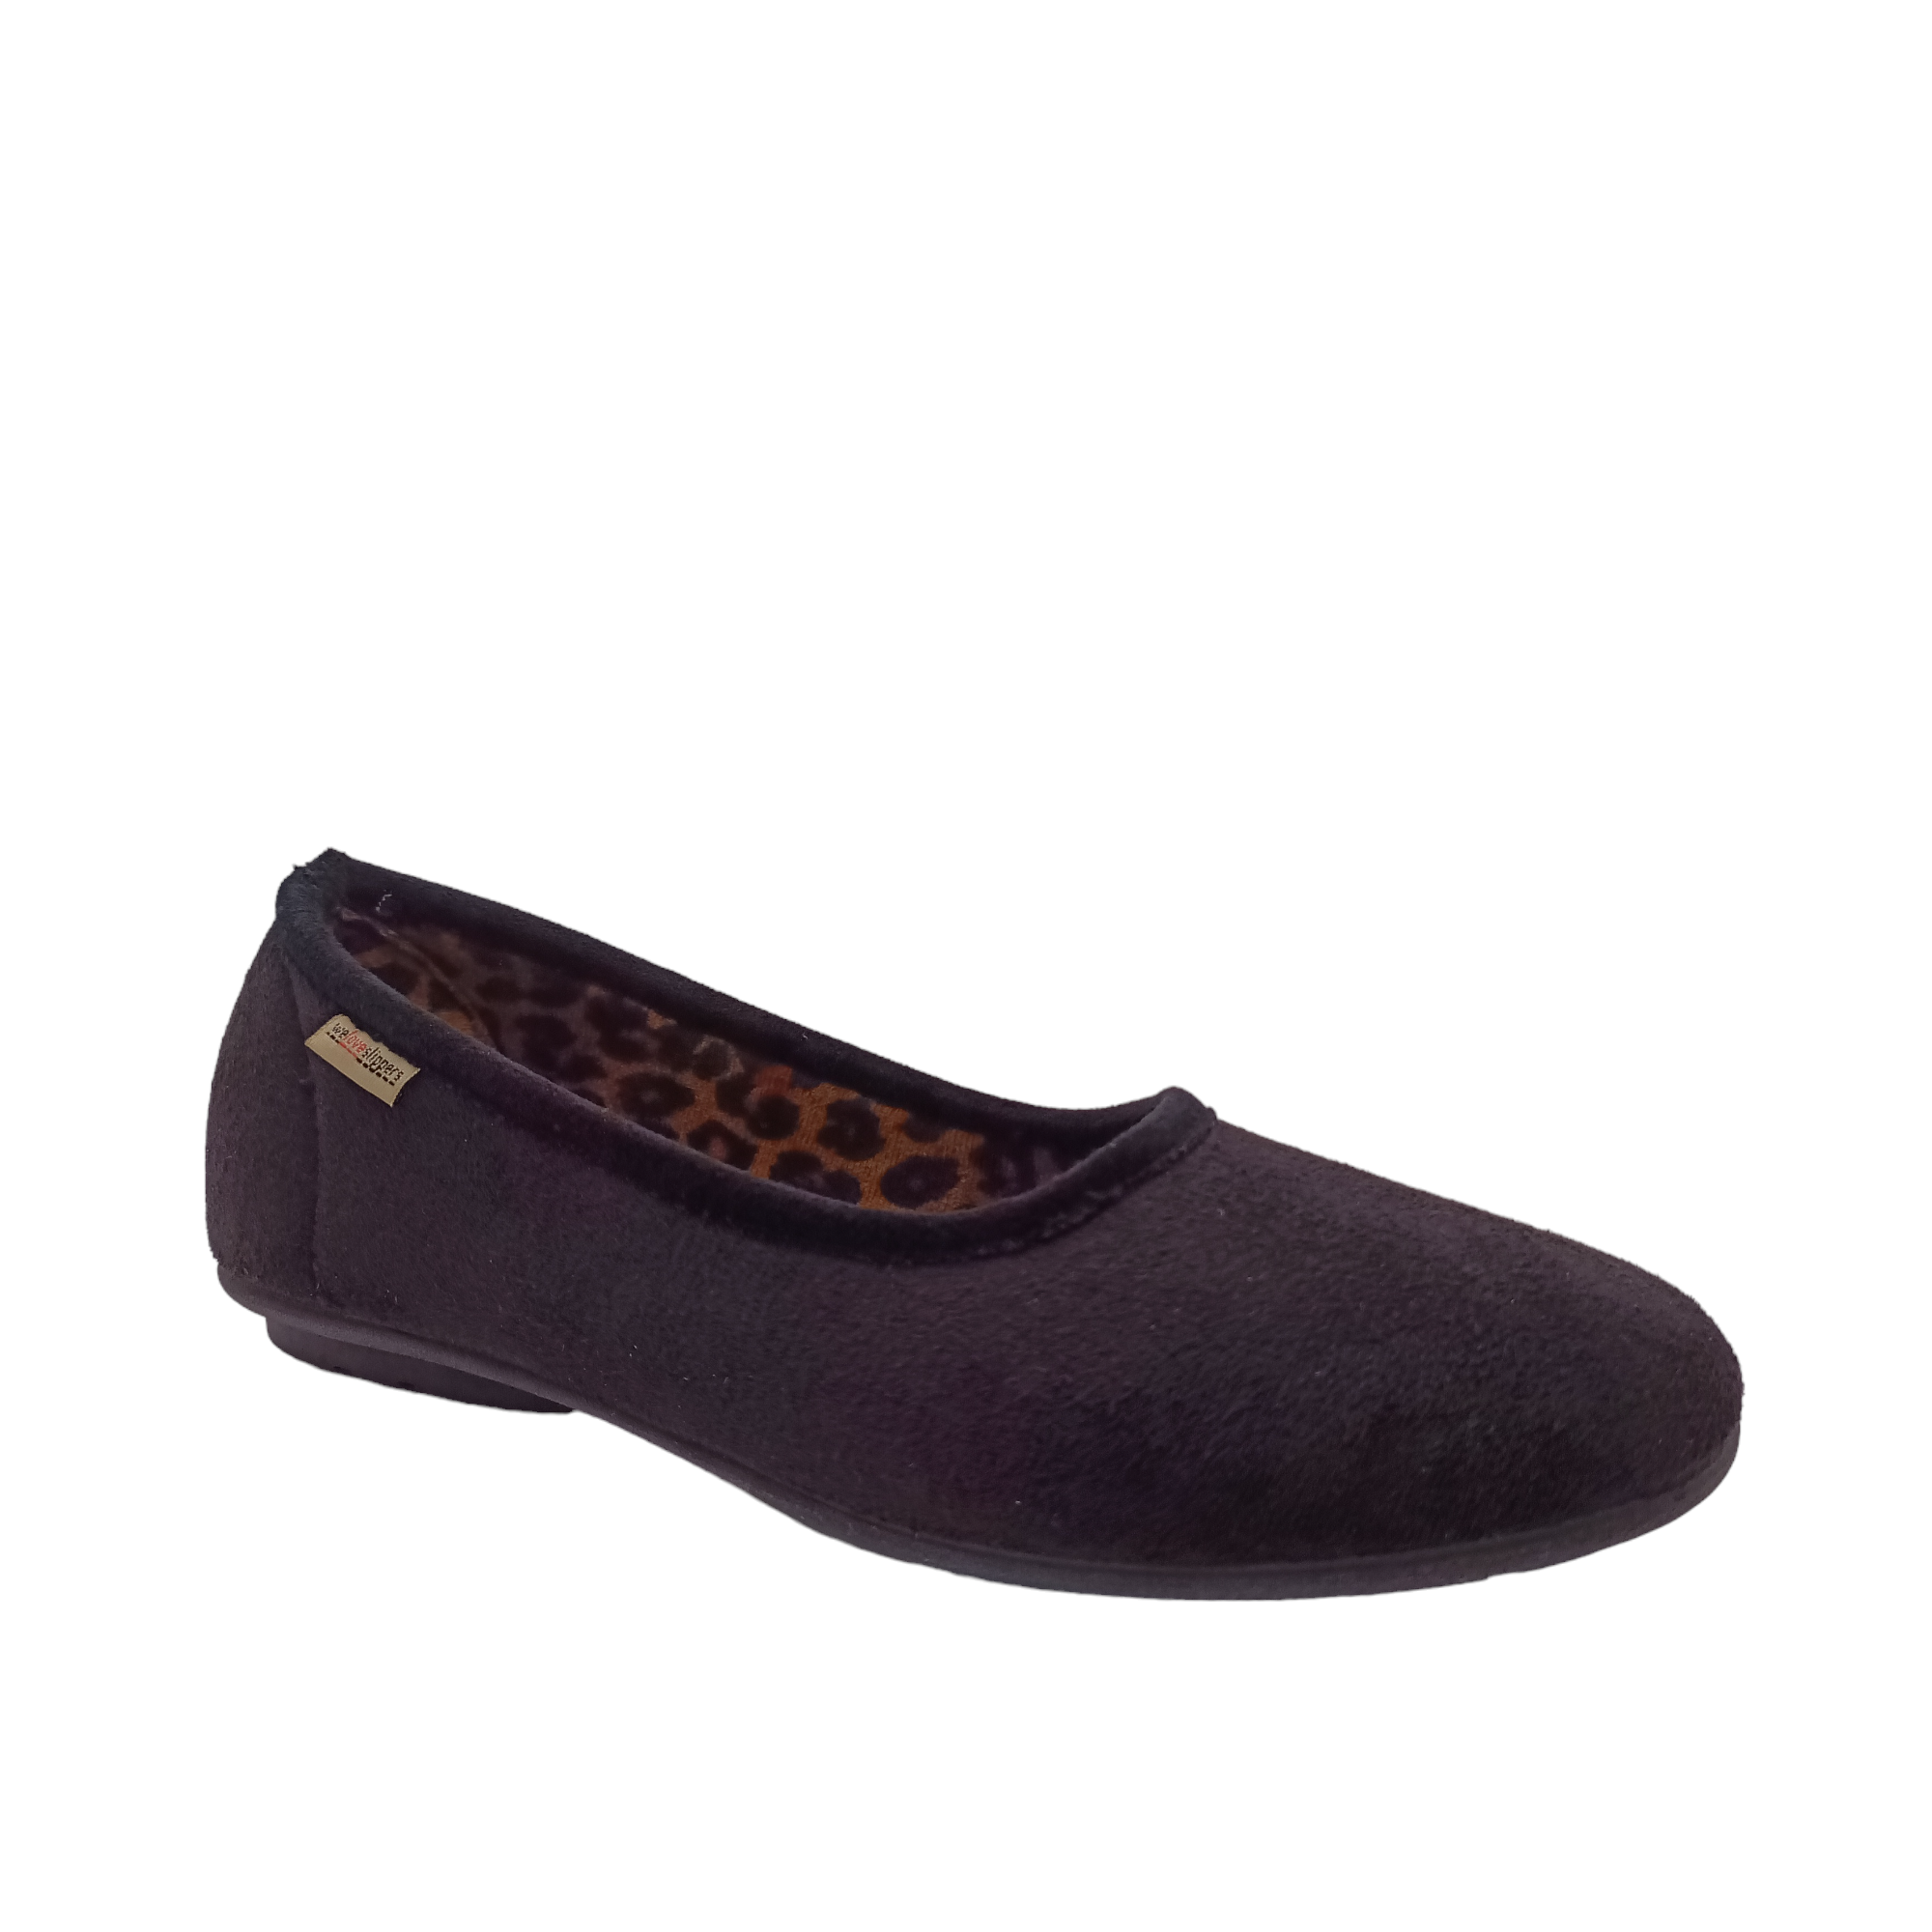 Side angle view of black Nuzzle Slippers with leopard print lining. Shop Womens Slippers and Shoes Online and In-store with shoe&me.